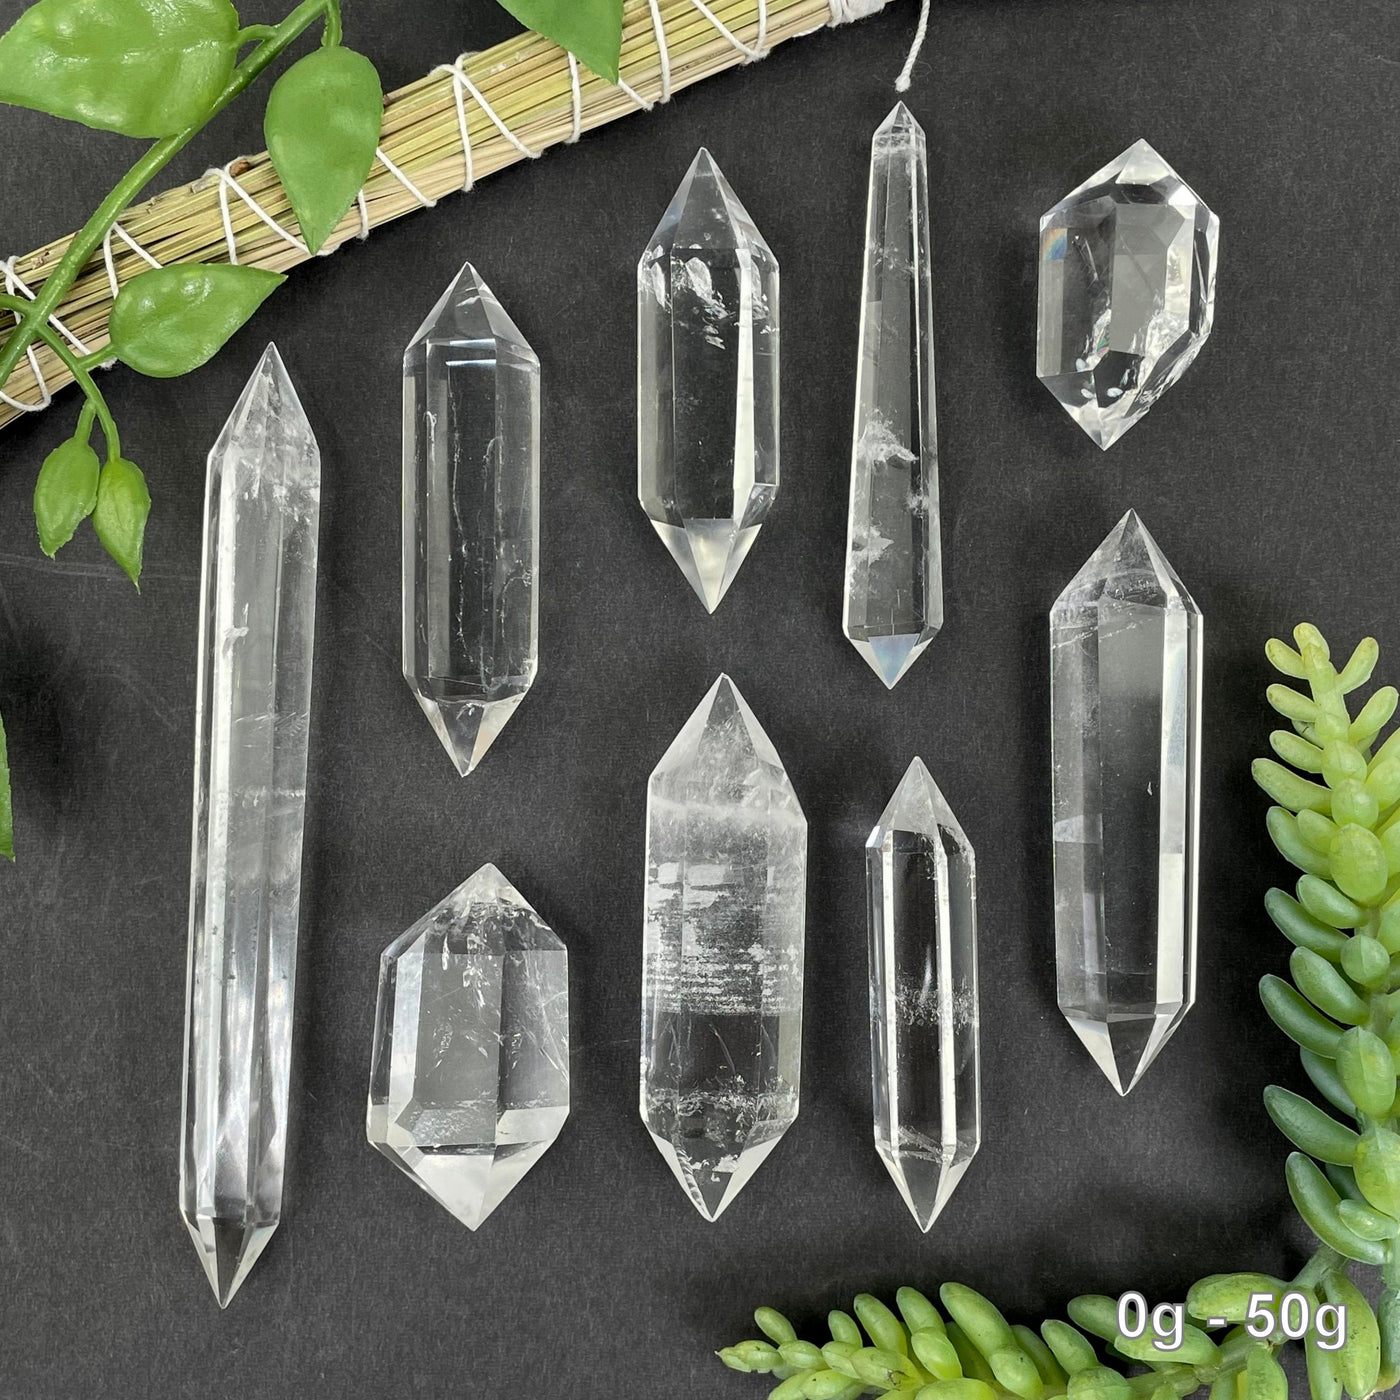 many 0g - 50g crystal quartz points on black background with plant decorations for possible variations